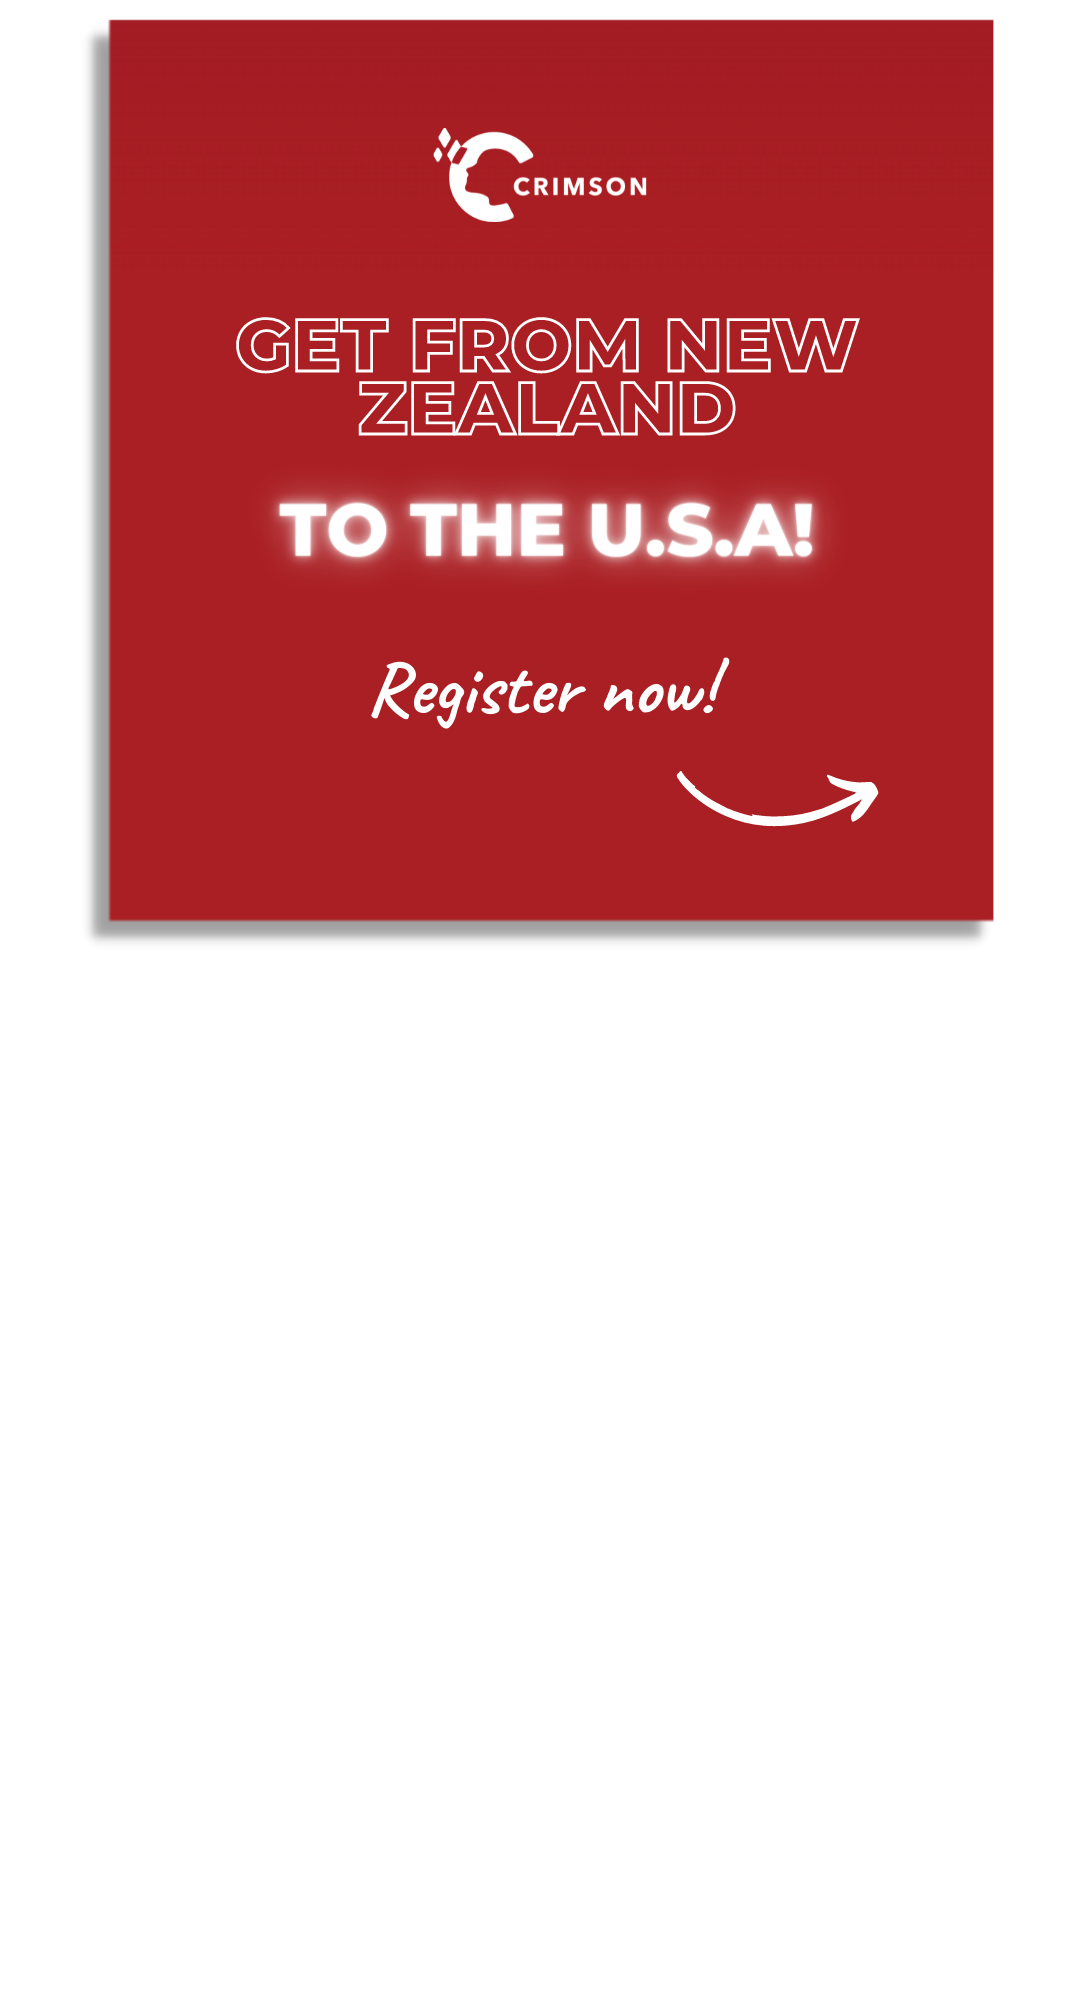 Looking to get into the top universities in the US? Register now!